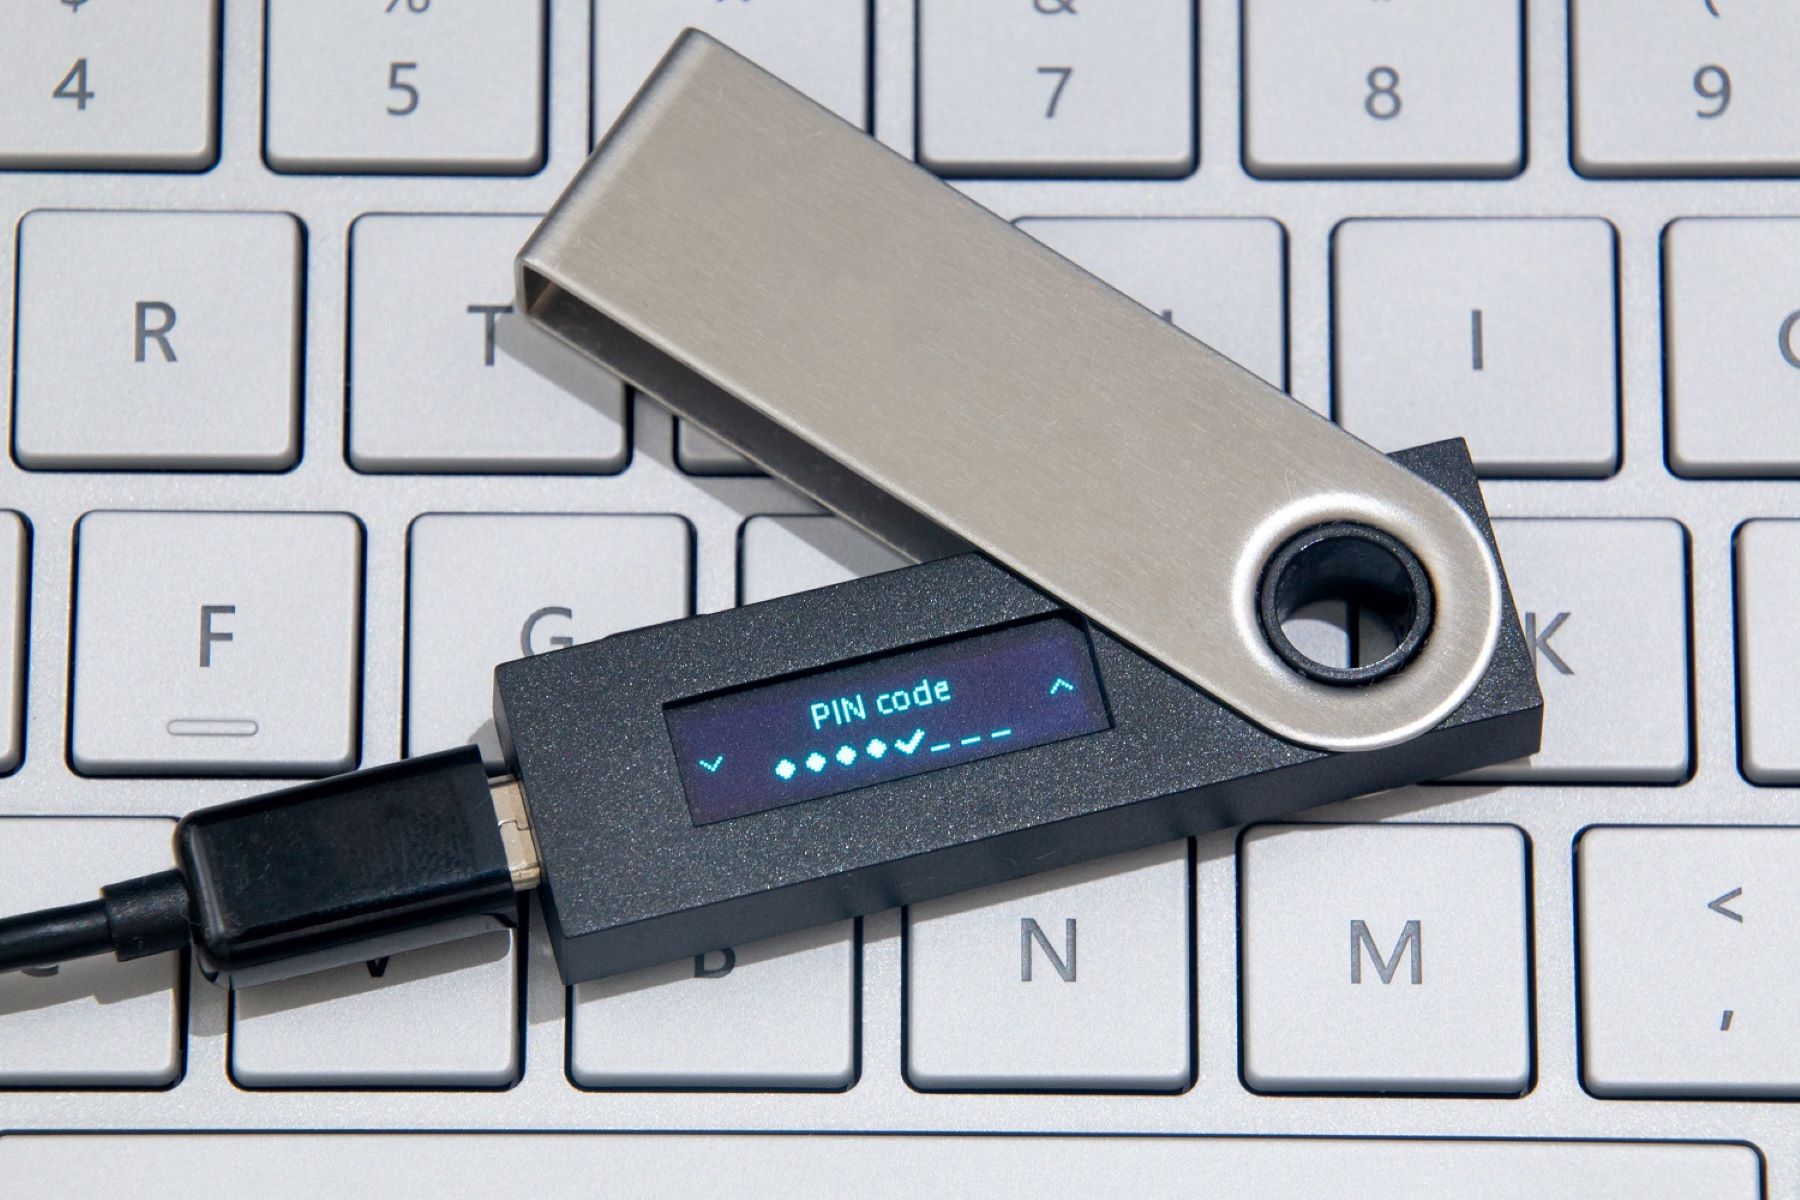 How To Use A Crypto Hardware Wallet